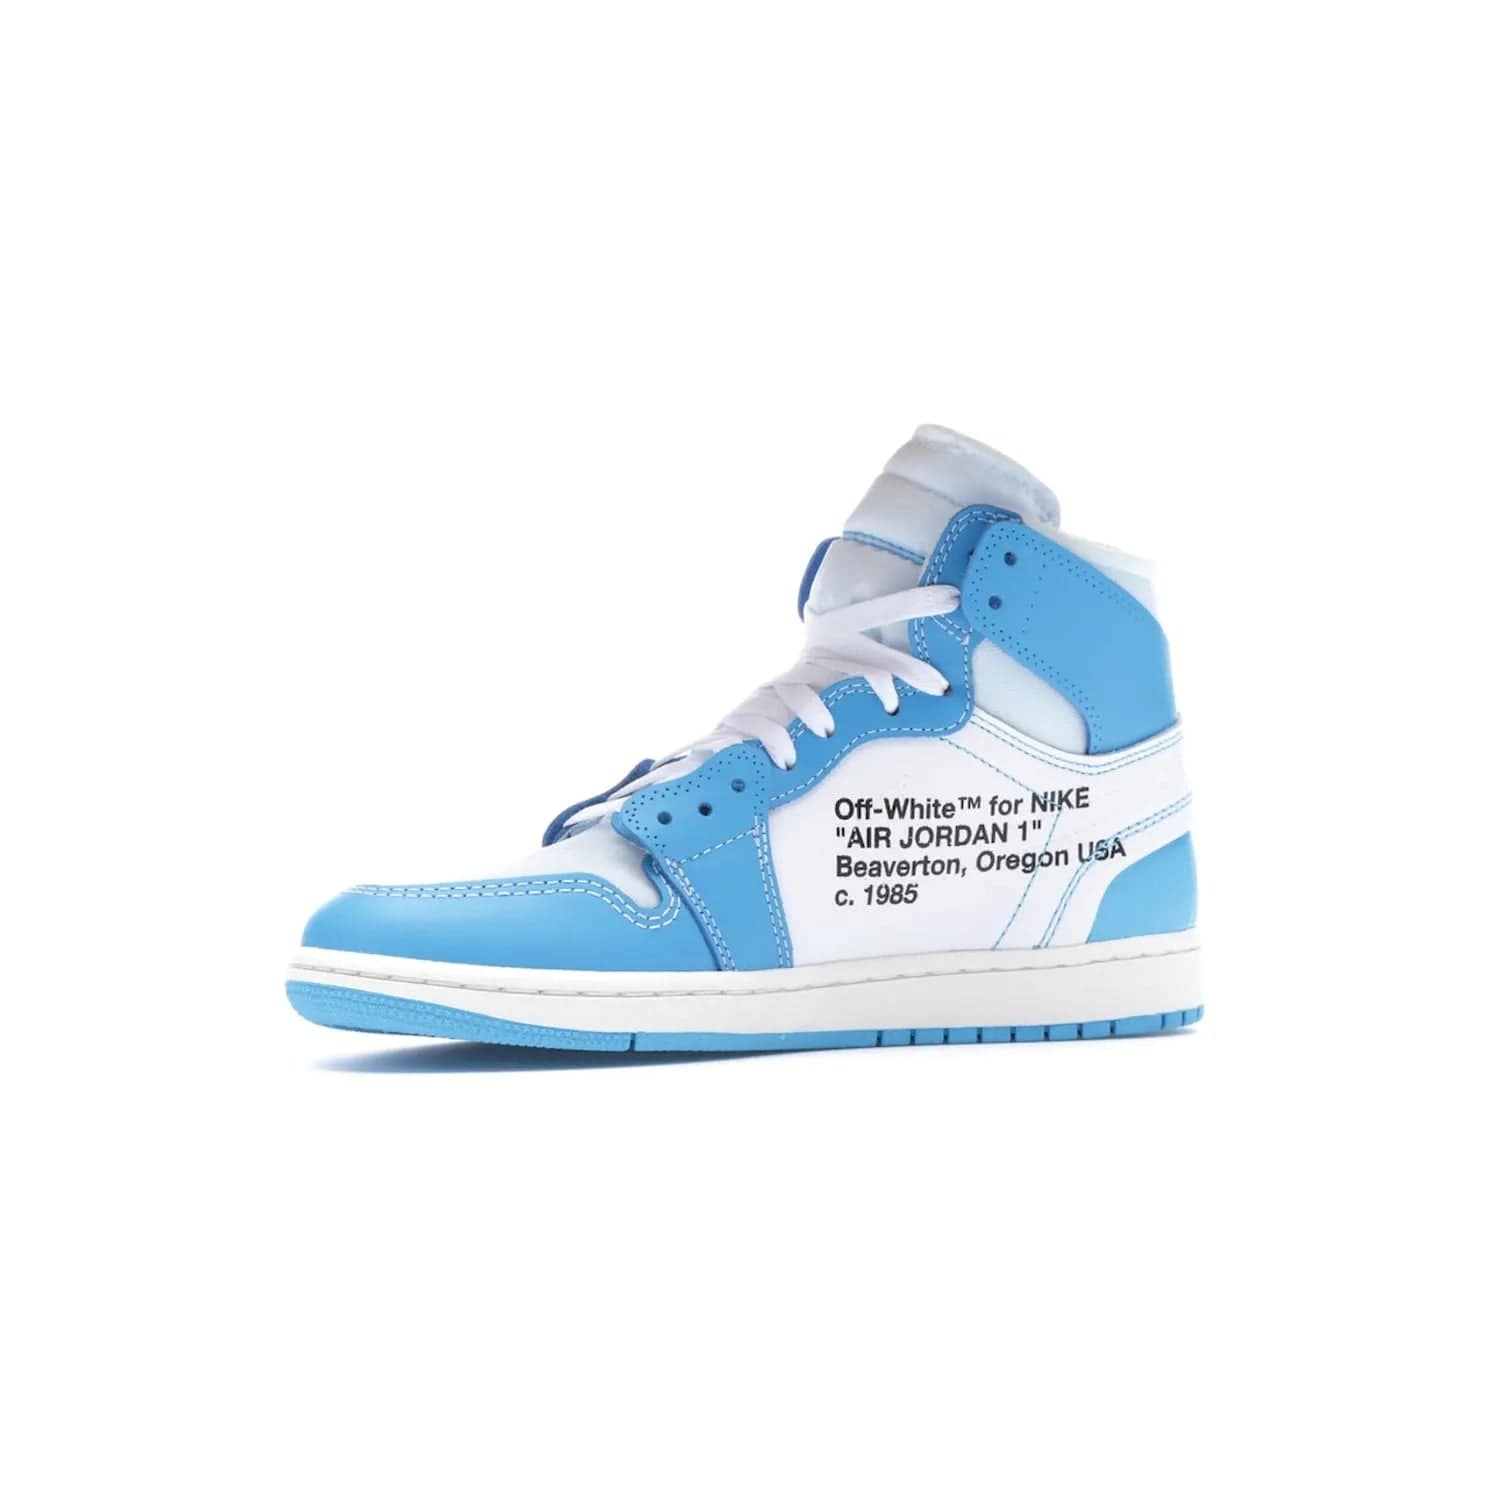 Jordan 1 Retro High Off-White University Blue - Image 17 - Only at www.BallersClubKickz.com - Classic Jordan 1 Retro High "Off-White UNC" sneakers meld style and comfort. Boasting deconstructed white and blue leather, Off-White detailing, and a white, dark powder blue and cone colorway, these sneakers are perfect for dressing up or down. Get the iconic Off-White Jordan 1's and upgrade your look.